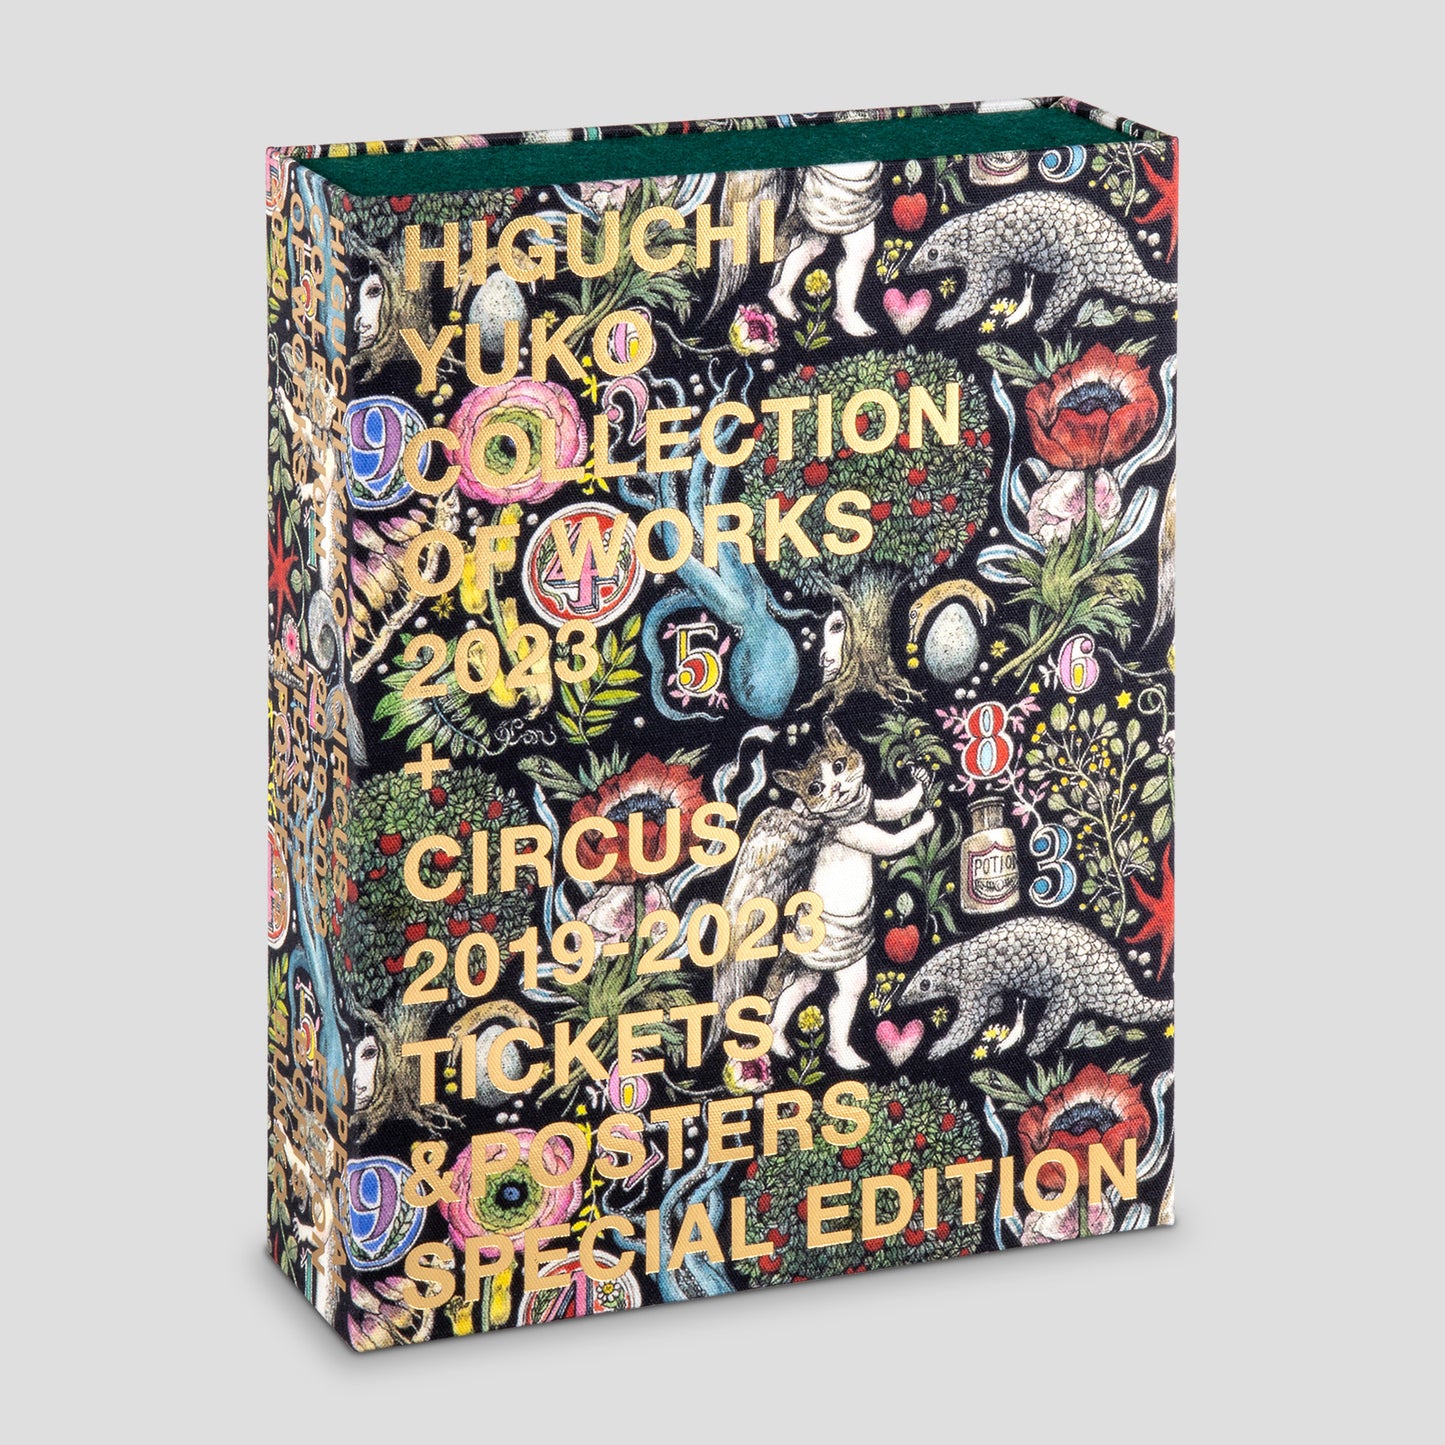 COLLECTION OF WORKS 2023(SPECIAL EDITION) BORIS